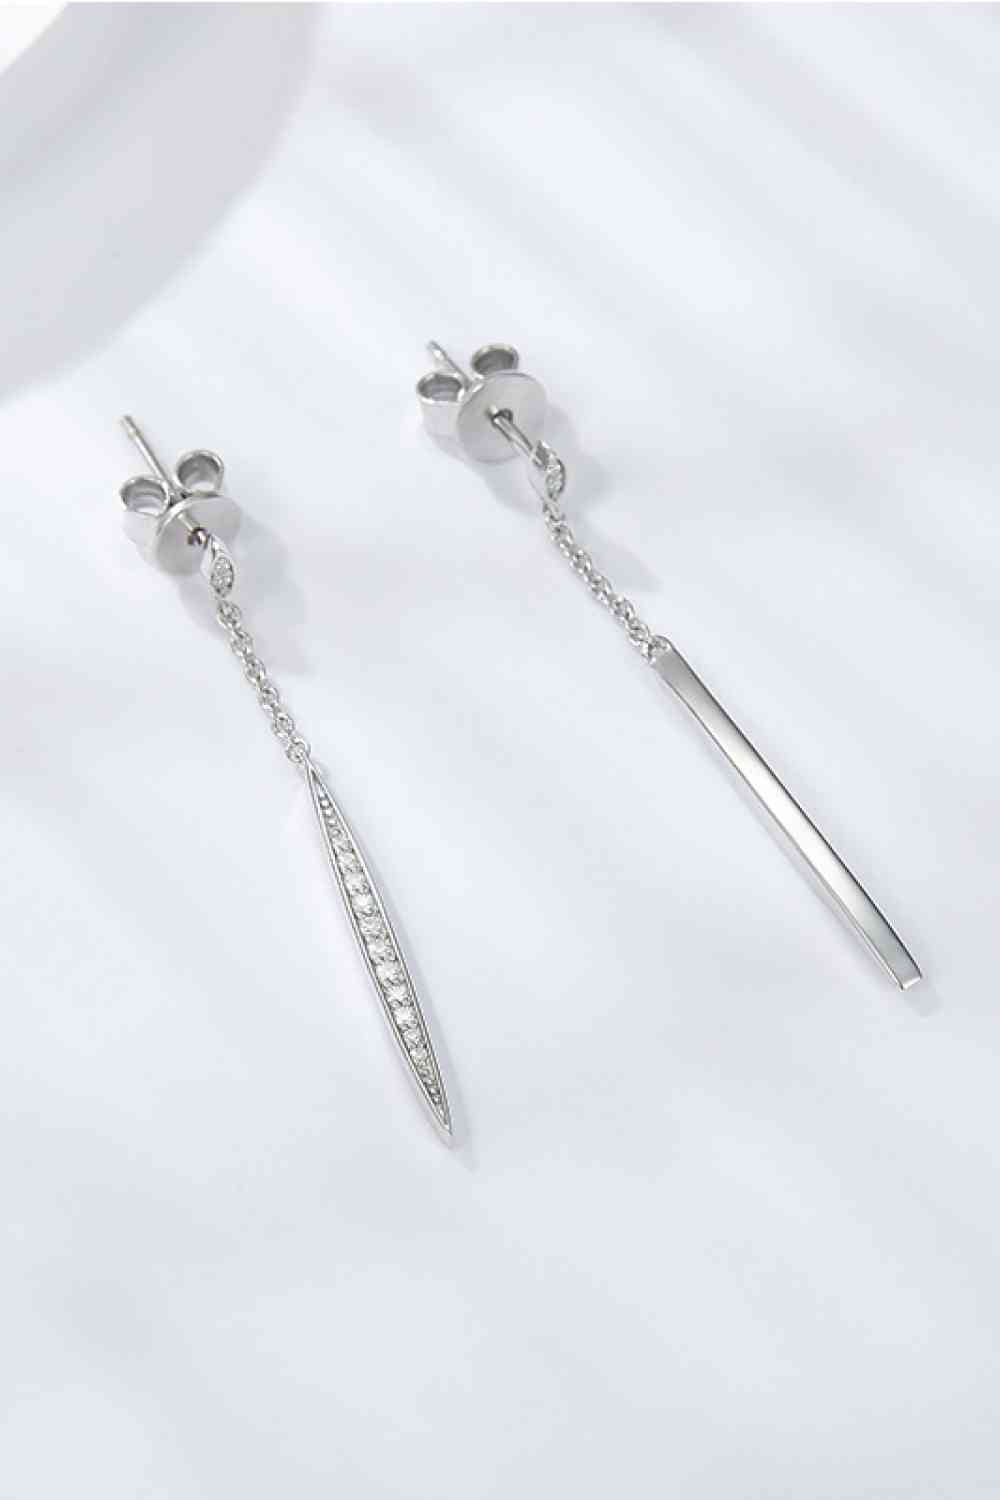 a pair of earrings with a bar and a chain hanging from it